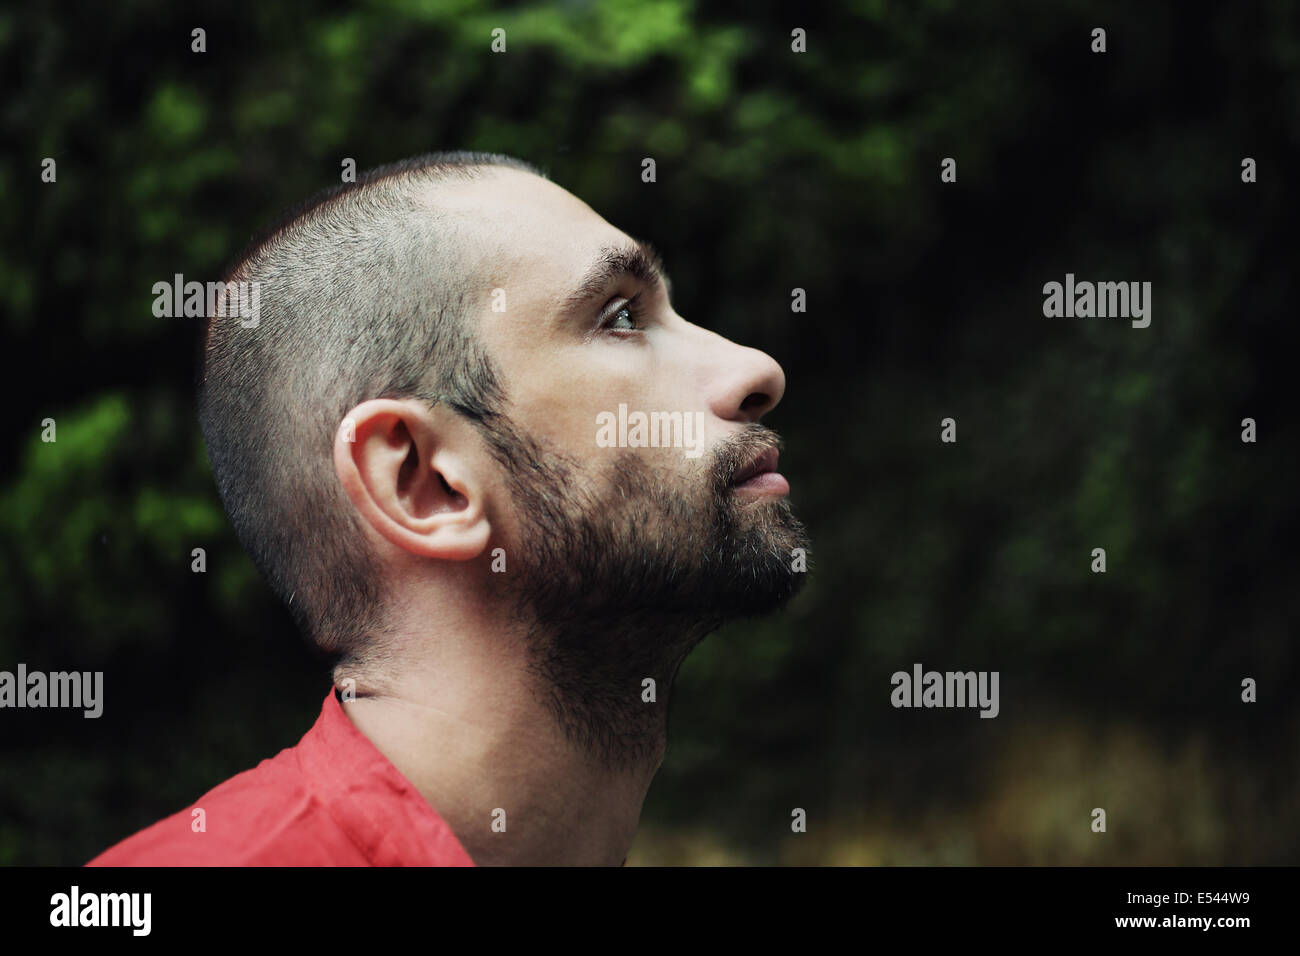 Portrait of  young sad man with short hair in forest Stock Photo